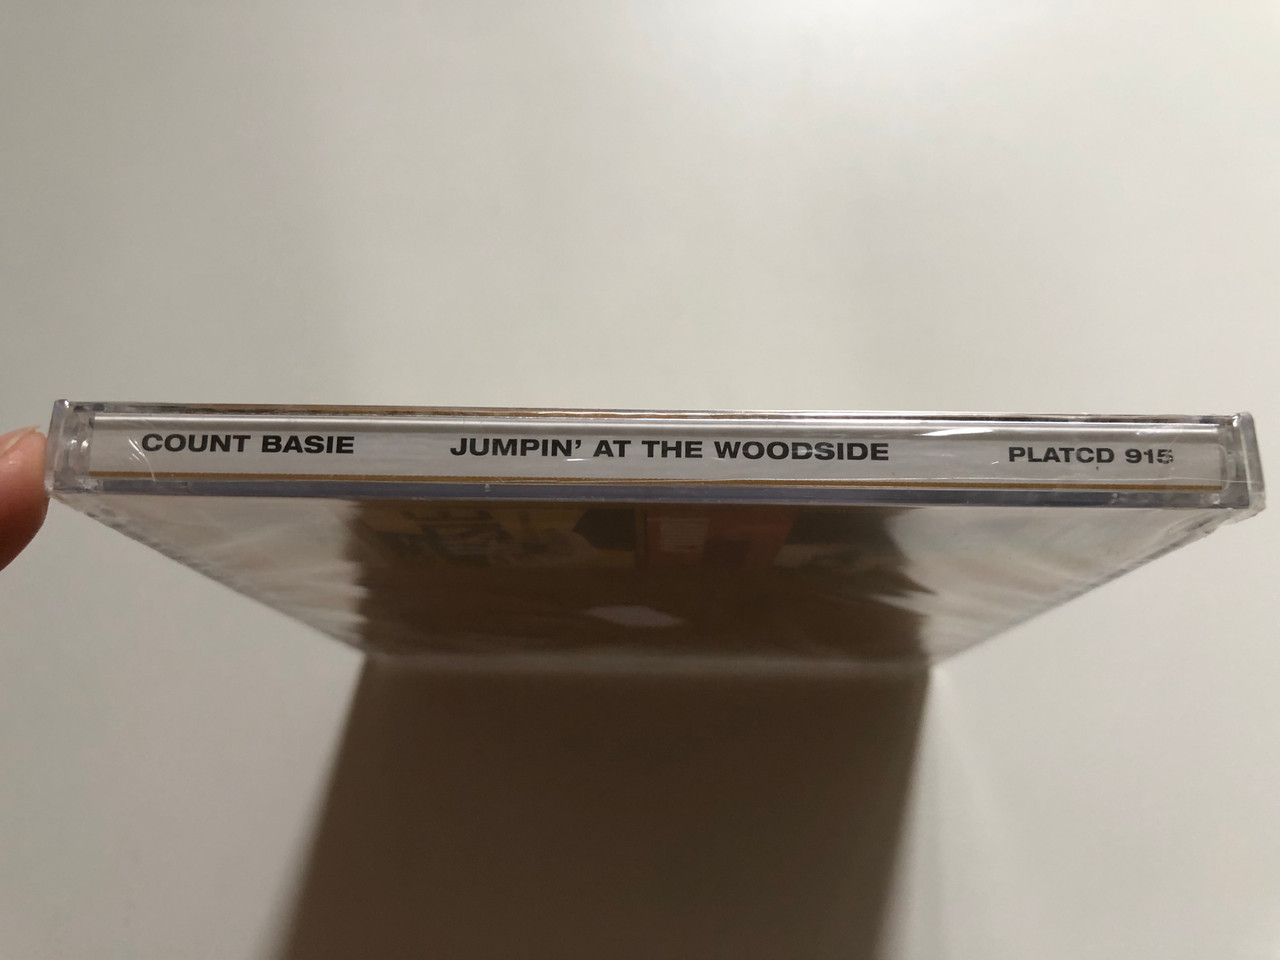 https://cdn10.bigcommerce.com/s-62bdpkt7pb/products/0/images/306577/Count_Basie_Jumpin_At_The_Woodside_Featuring_One_Oclock_Jump_Roseland_Shuffle_The_Glory_Of_Love_Dickies_Dream_Moten_Swing_The_Jazz_Masters_Series_Prism_Leisure_Audio_CD_2002_PL_3__66127.1698311096.1280.1280.JPG?c=2